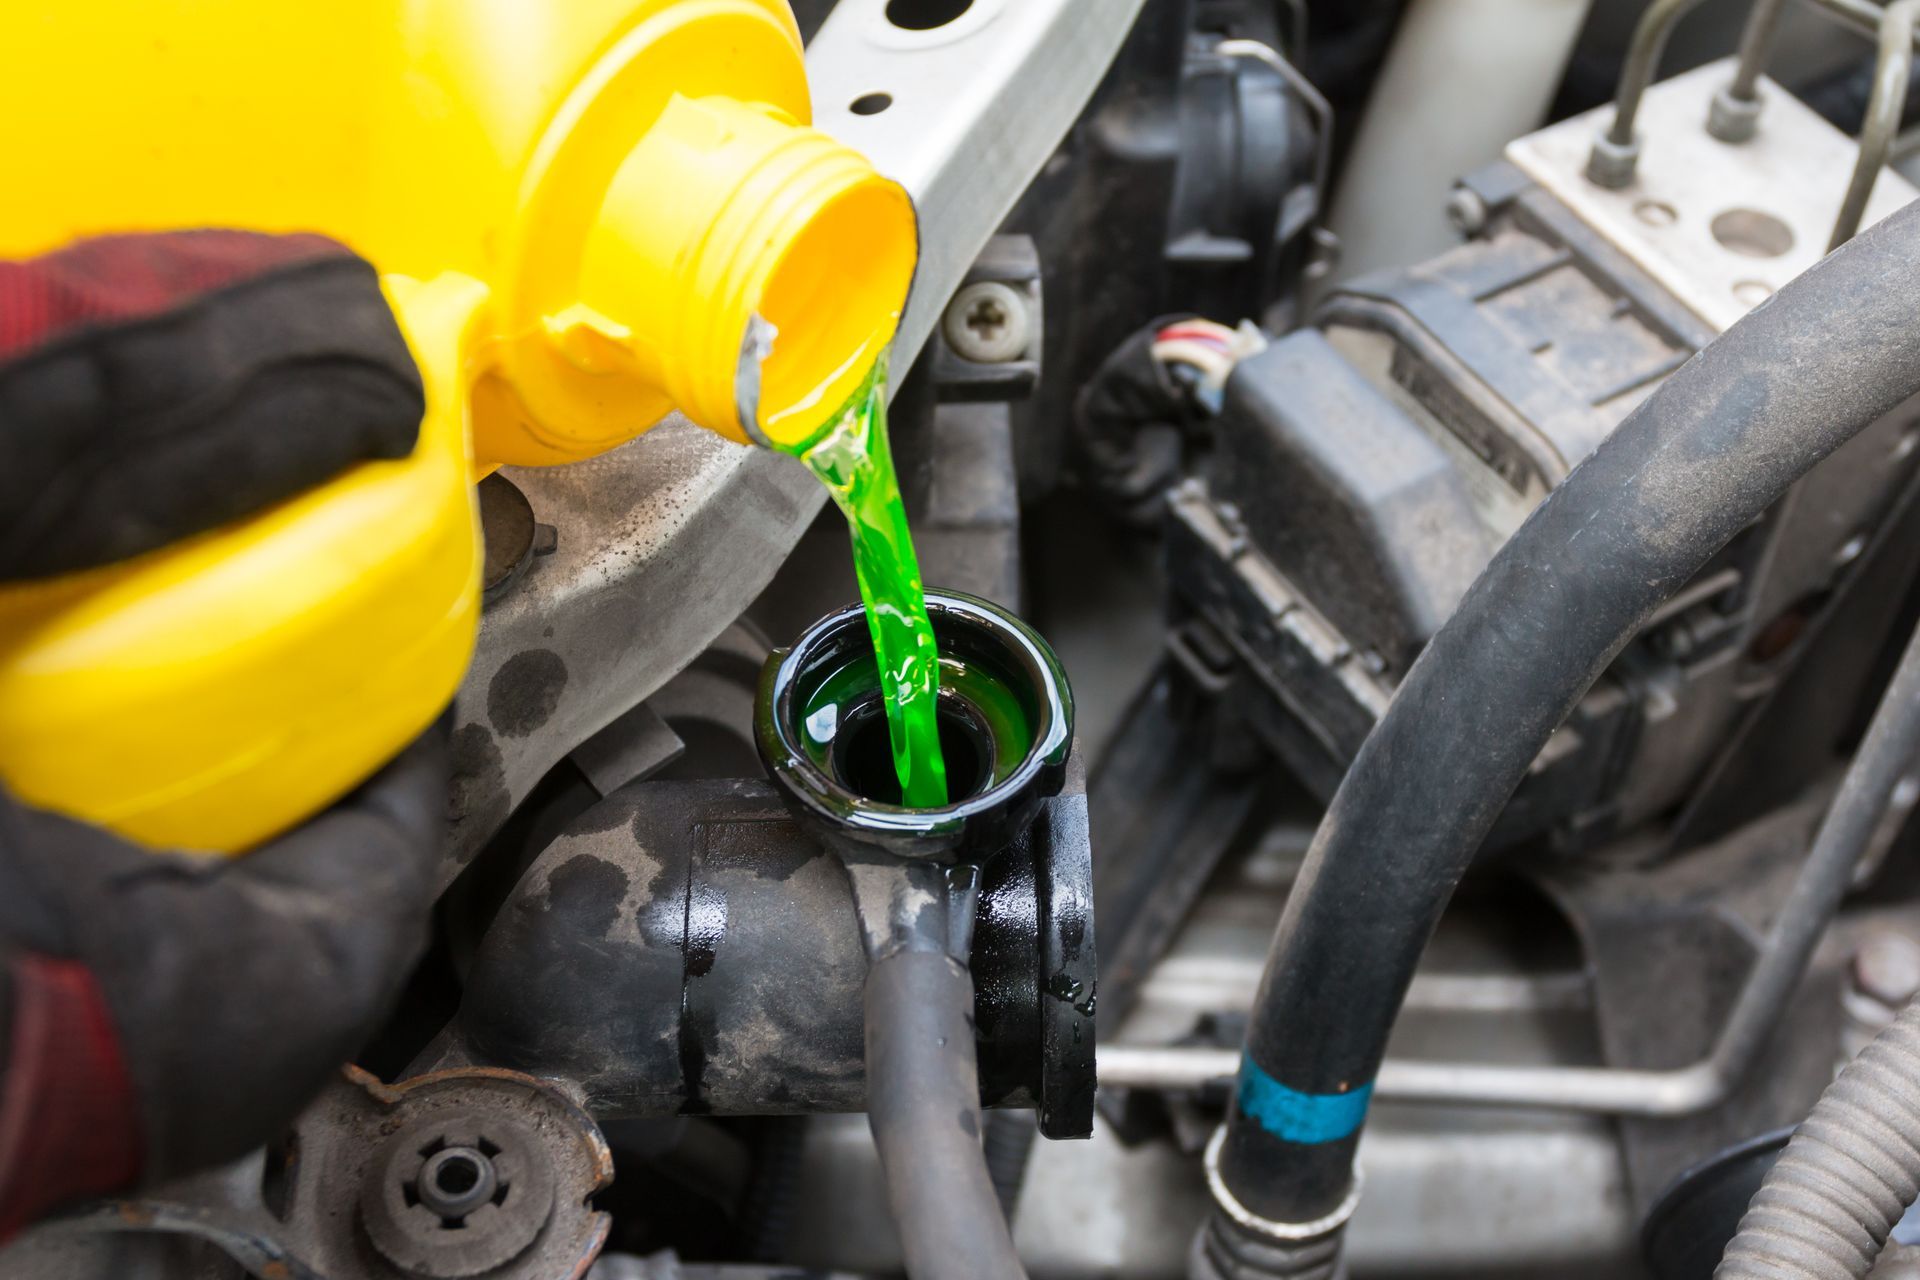 Coolant & Antifreeze at ﻿RGV Tire Pros/Valvoline Express Care﻿ in ﻿Mission and Palmdale, TX﻿